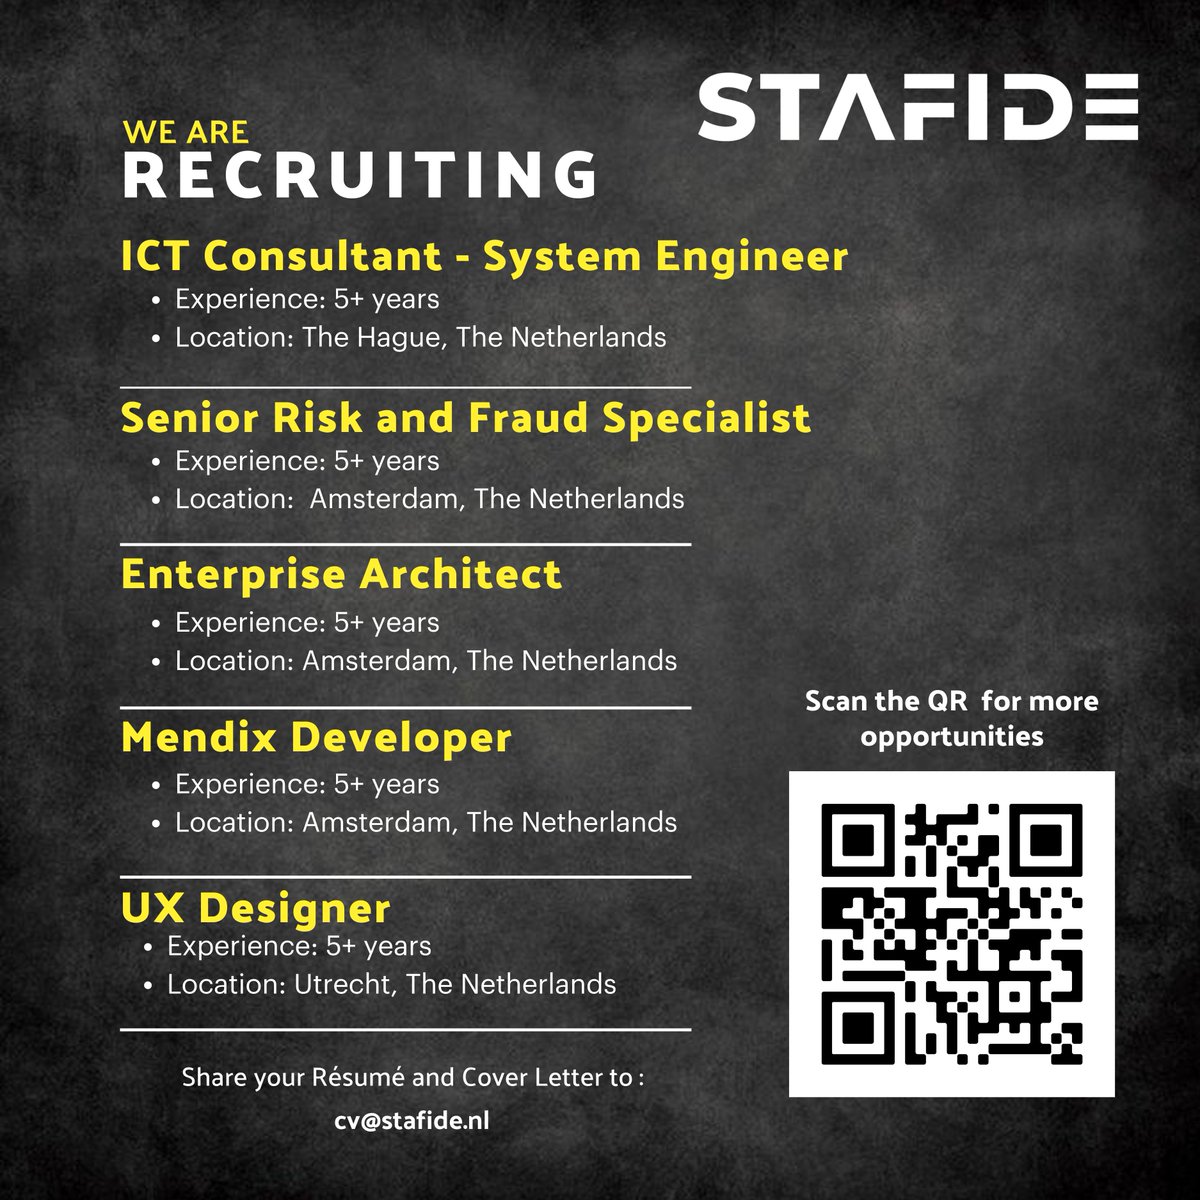 Explore our opportunities and be part of shaping the future of technology with us at STAFIDE!

Check out our latest career opportunities.

#netherlandsjo #AmsterdamJobs #nljobs #recruitment #career #CareerOpportunity #TechCareer #BuildTheFuture